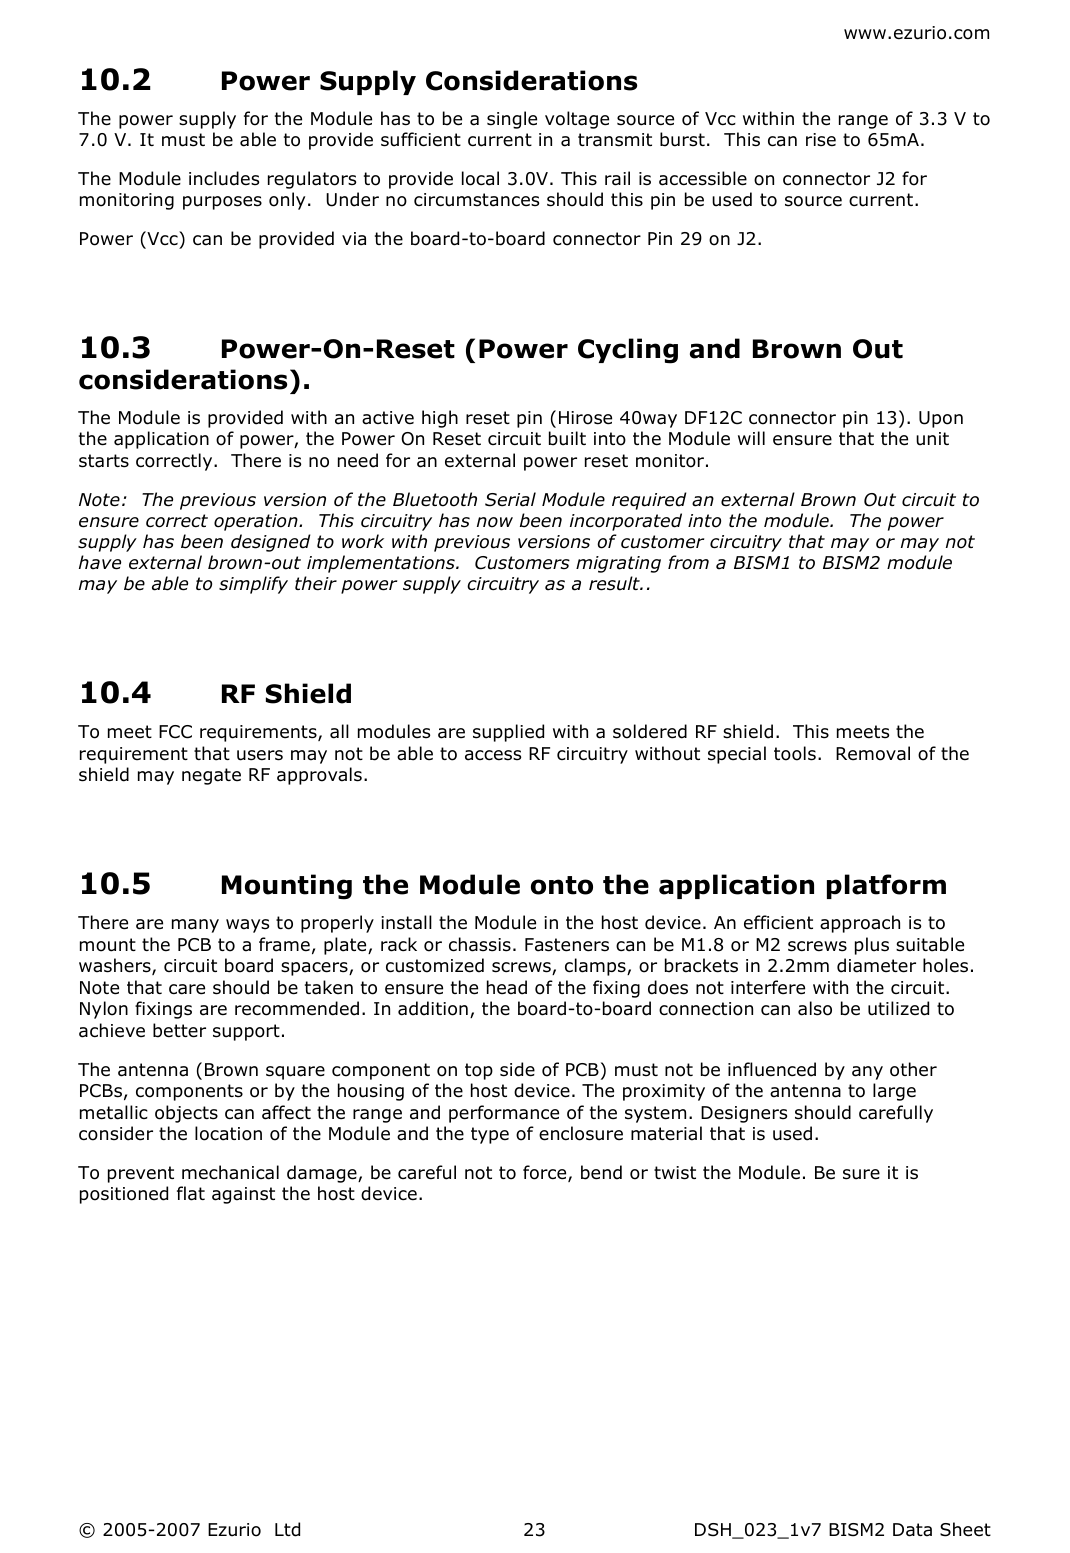 www.ezurio.com © 2005-2007 Ezurio  Ltd  DSH_023_1v7 BISM2 Data Sheet  2310.2 Power Supply Considerations The power supply for the Module has to be a single voltage source of Vcc within the range of 3.3 V to 7.0 V. It must be able to provide sufficient current in a transmit burst.  This can rise to 65mA.   The Module includes regulators to provide local 3.0V. This rail is accessible on connector J2 for monitoring purposes only.  Under no circumstances should this pin be used to source current. Power (Vcc) can be provided via the board-to-board connector Pin 29 on J2.   10.3 Power-On-Reset (Power Cycling and Brown Out considerations). The Module is provided with an active high reset pin (Hirose 40way DF12C connector pin 13). Upon the application of power, the Power On Reset circuit built into the Module will ensure that the unit starts correctly.  There is no need for an external power reset monitor. Note:  The previous version of the Bluetooth Serial Module required an external Brown Out circuit to ensure correct operation.  This circuitry has now been incorporated into the module.  The power supply has been designed to work with previous versions of customer circuitry that may or may not have external brown-out implementations.  Customers migrating from a BISM1 to BISM2 module may be able to simplify their power supply circuitry as a result..  10.4 RF Shield To meet FCC requirements, all modules are supplied with a soldered RF shield.  This meets the requirement that users may not be able to access RF circuitry without special tools.  Removal of the shield may negate RF approvals.  10.5 Mounting the Module onto the application platform There are many ways to properly install the Module in the host device. An efficient approach is to mount the PCB to a frame, plate, rack or chassis. Fasteners can be M1.8 or M2 screws plus suitable washers, circuit board spacers, or customized screws, clamps, or brackets in 2.2mm diameter holes. Note that care should be taken to ensure the head of the fixing does not interfere with the circuit. Nylon fixings are recommended. In addition, the board-to-board connection can also be utilized to achieve better support.  The antenna (Brown square component on top side of PCB) must not be influenced by any other PCBs, components or by the housing of the host device. The proximity of the antenna to large metallic objects can affect the range and performance of the system. Designers should carefully consider the location of the Module and the type of enclosure material that is used. To prevent mechanical damage, be careful not to force, bend or twist the Module. Be sure it is positioned flat against the host device.  